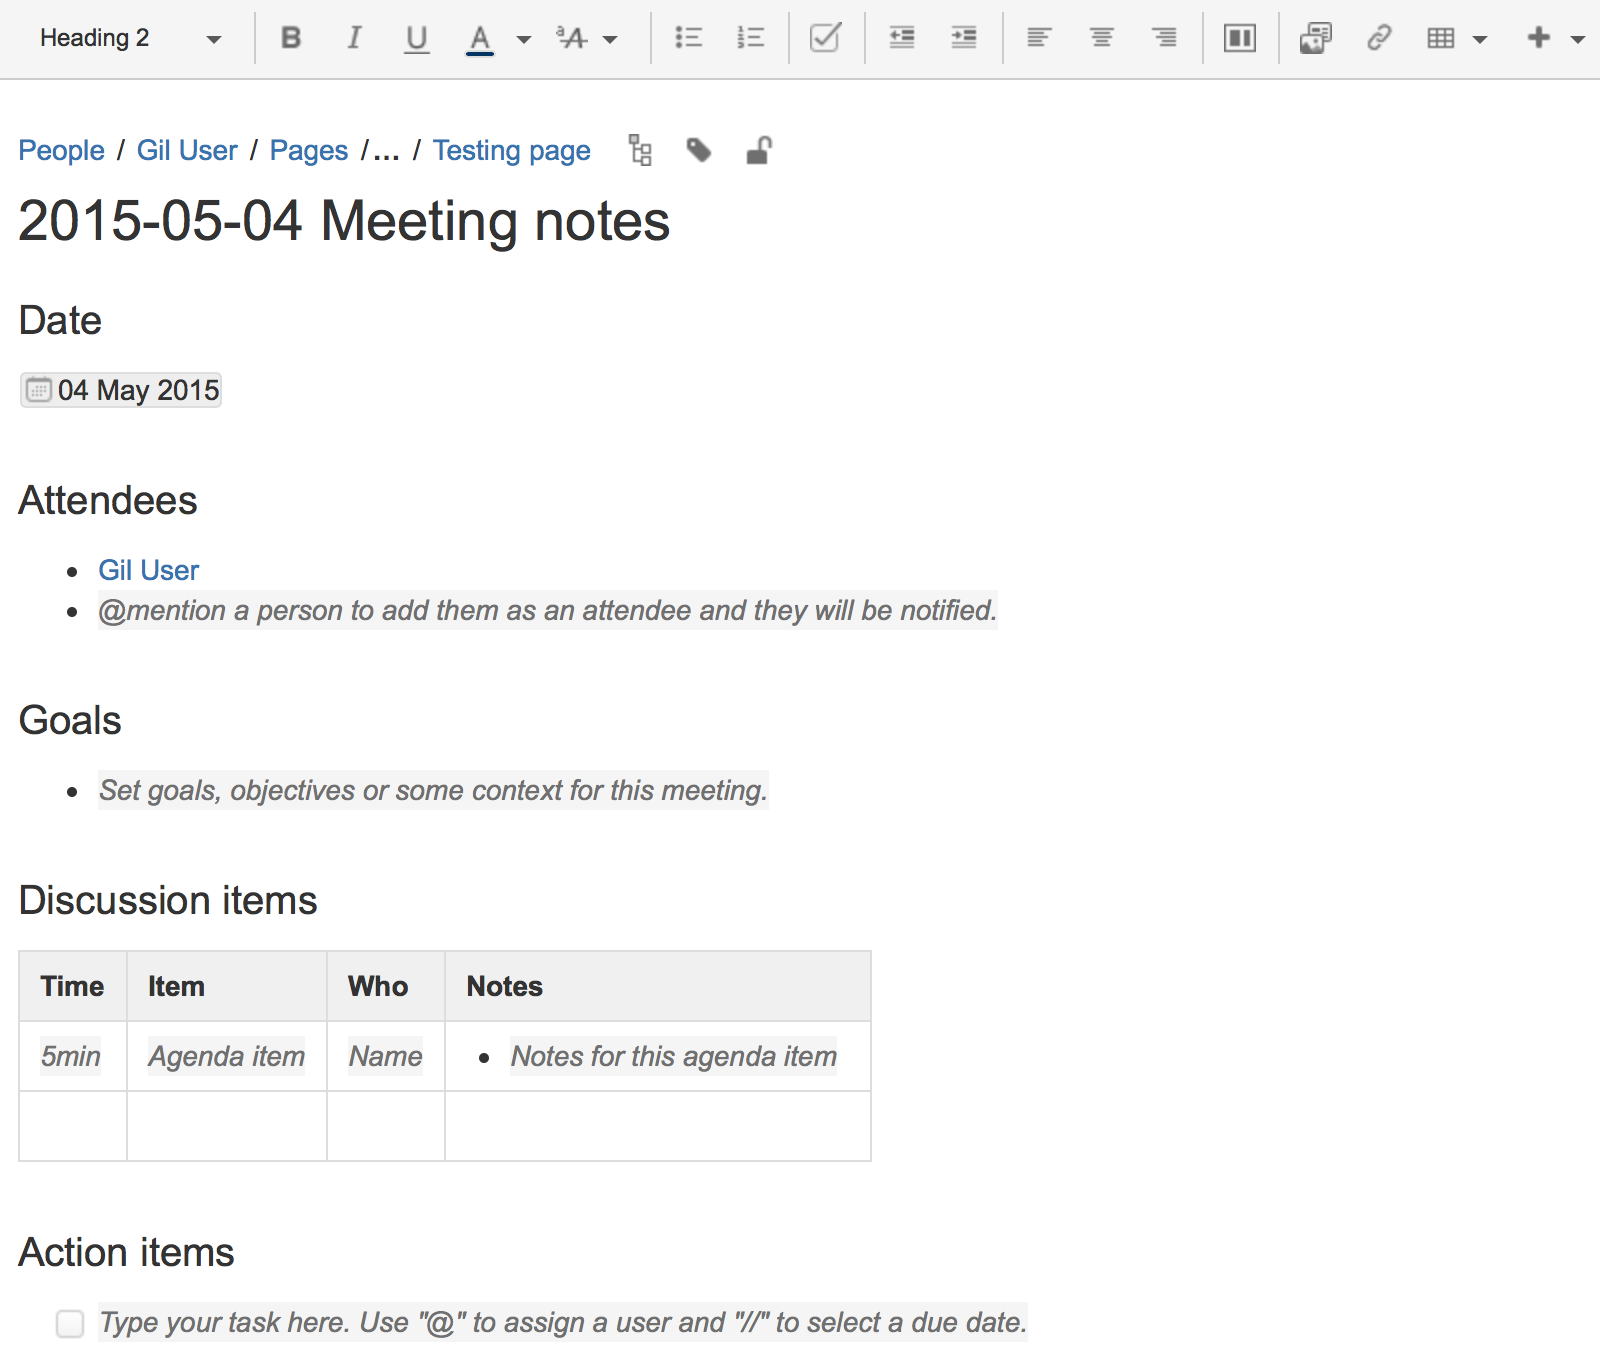 How to write up minutes of meetings